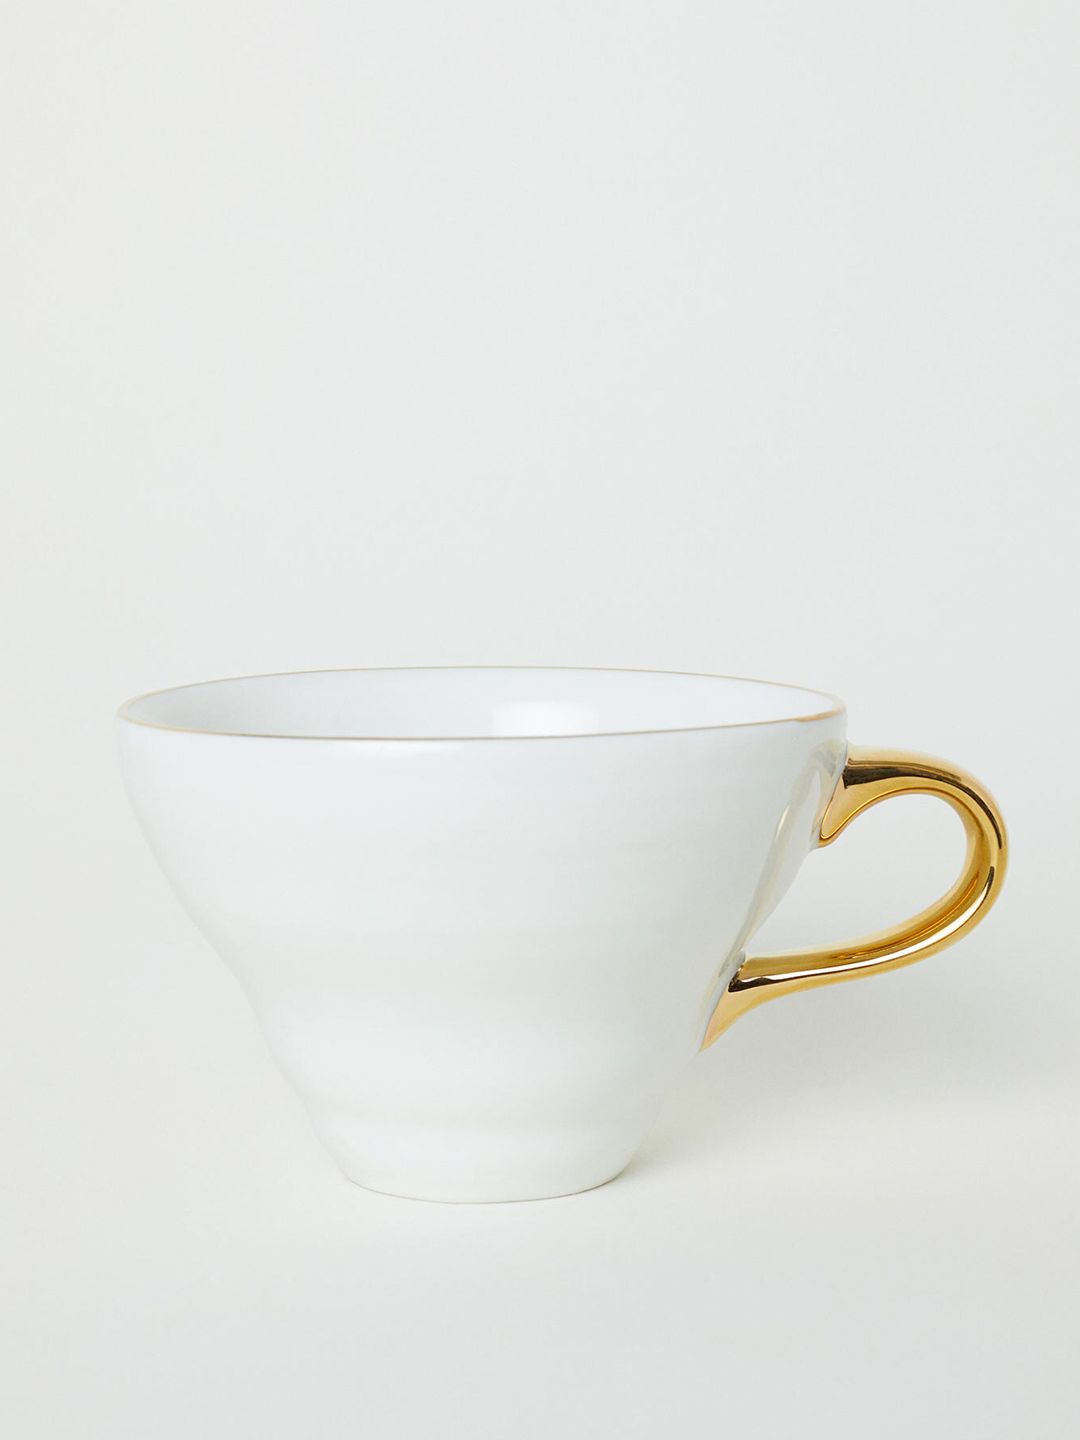 H&M White & Gold Toned Textured Porcelain Cup Price in India